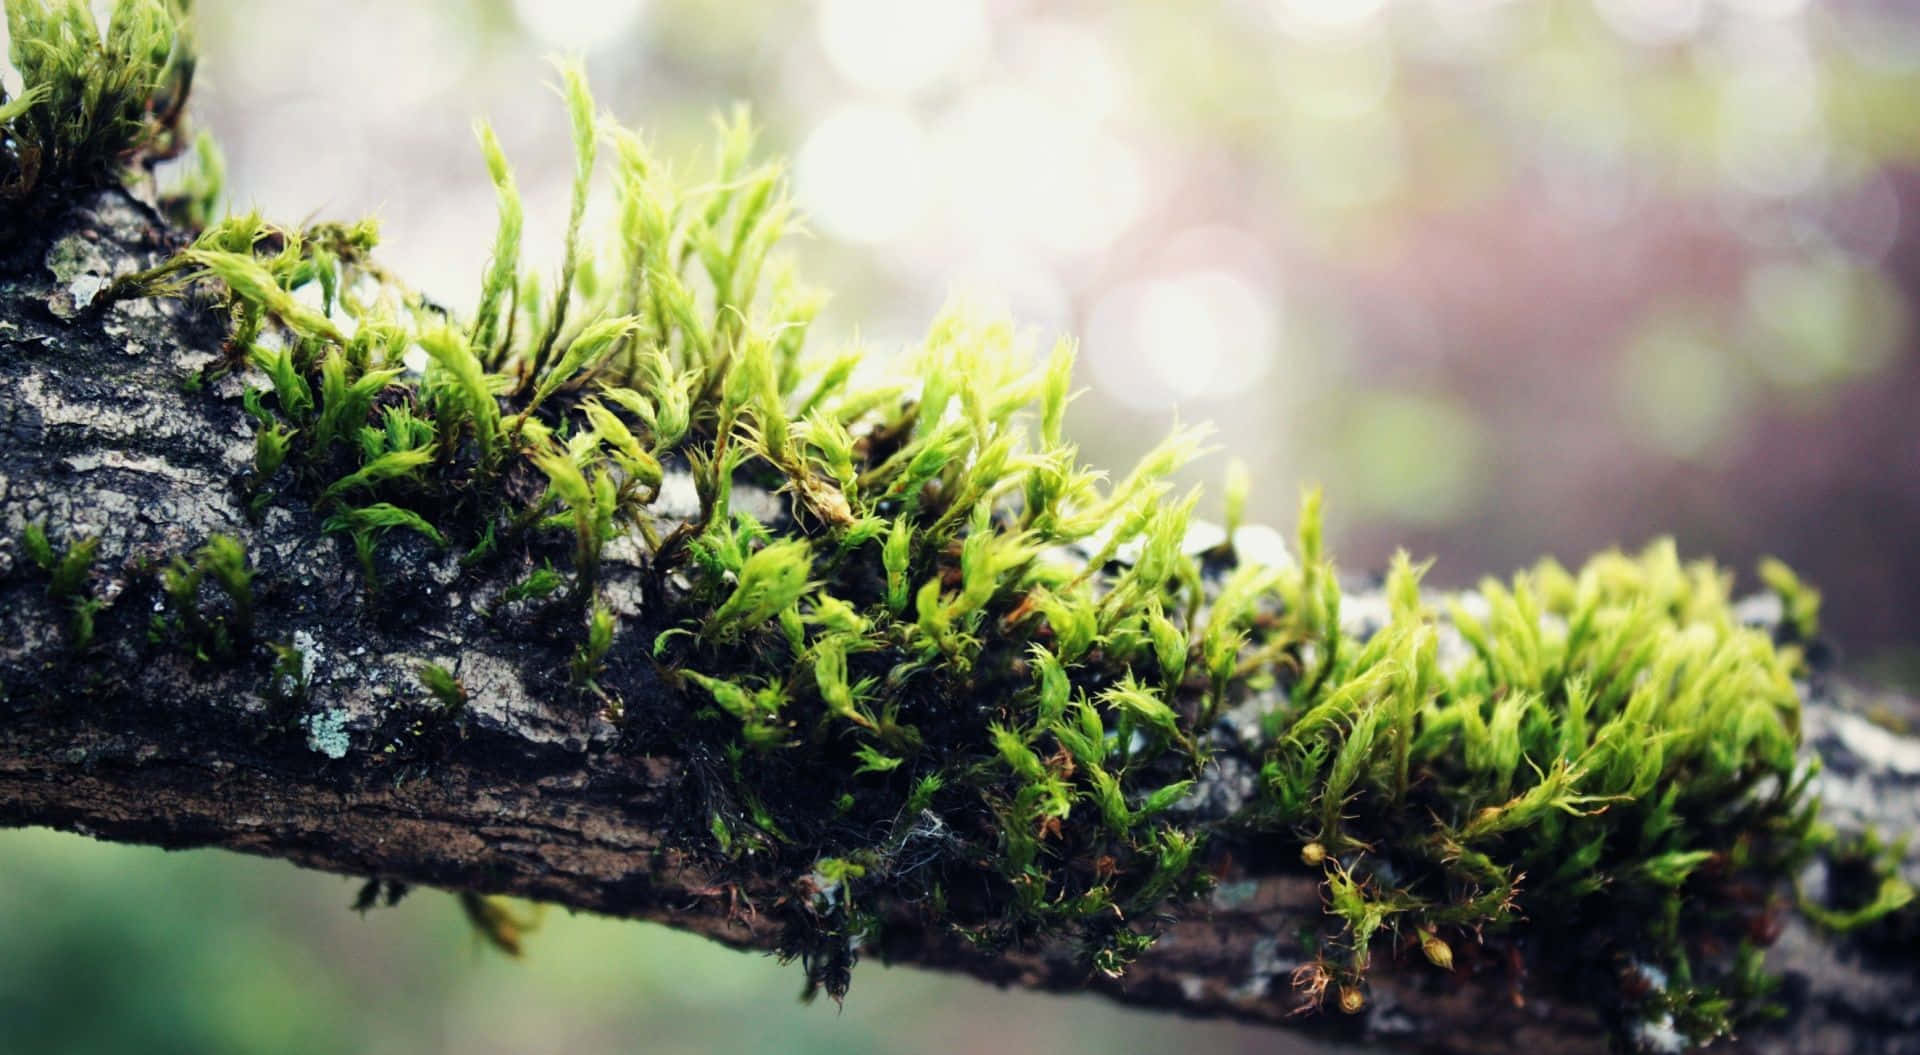 Explore Nature with the Beauty of Moss